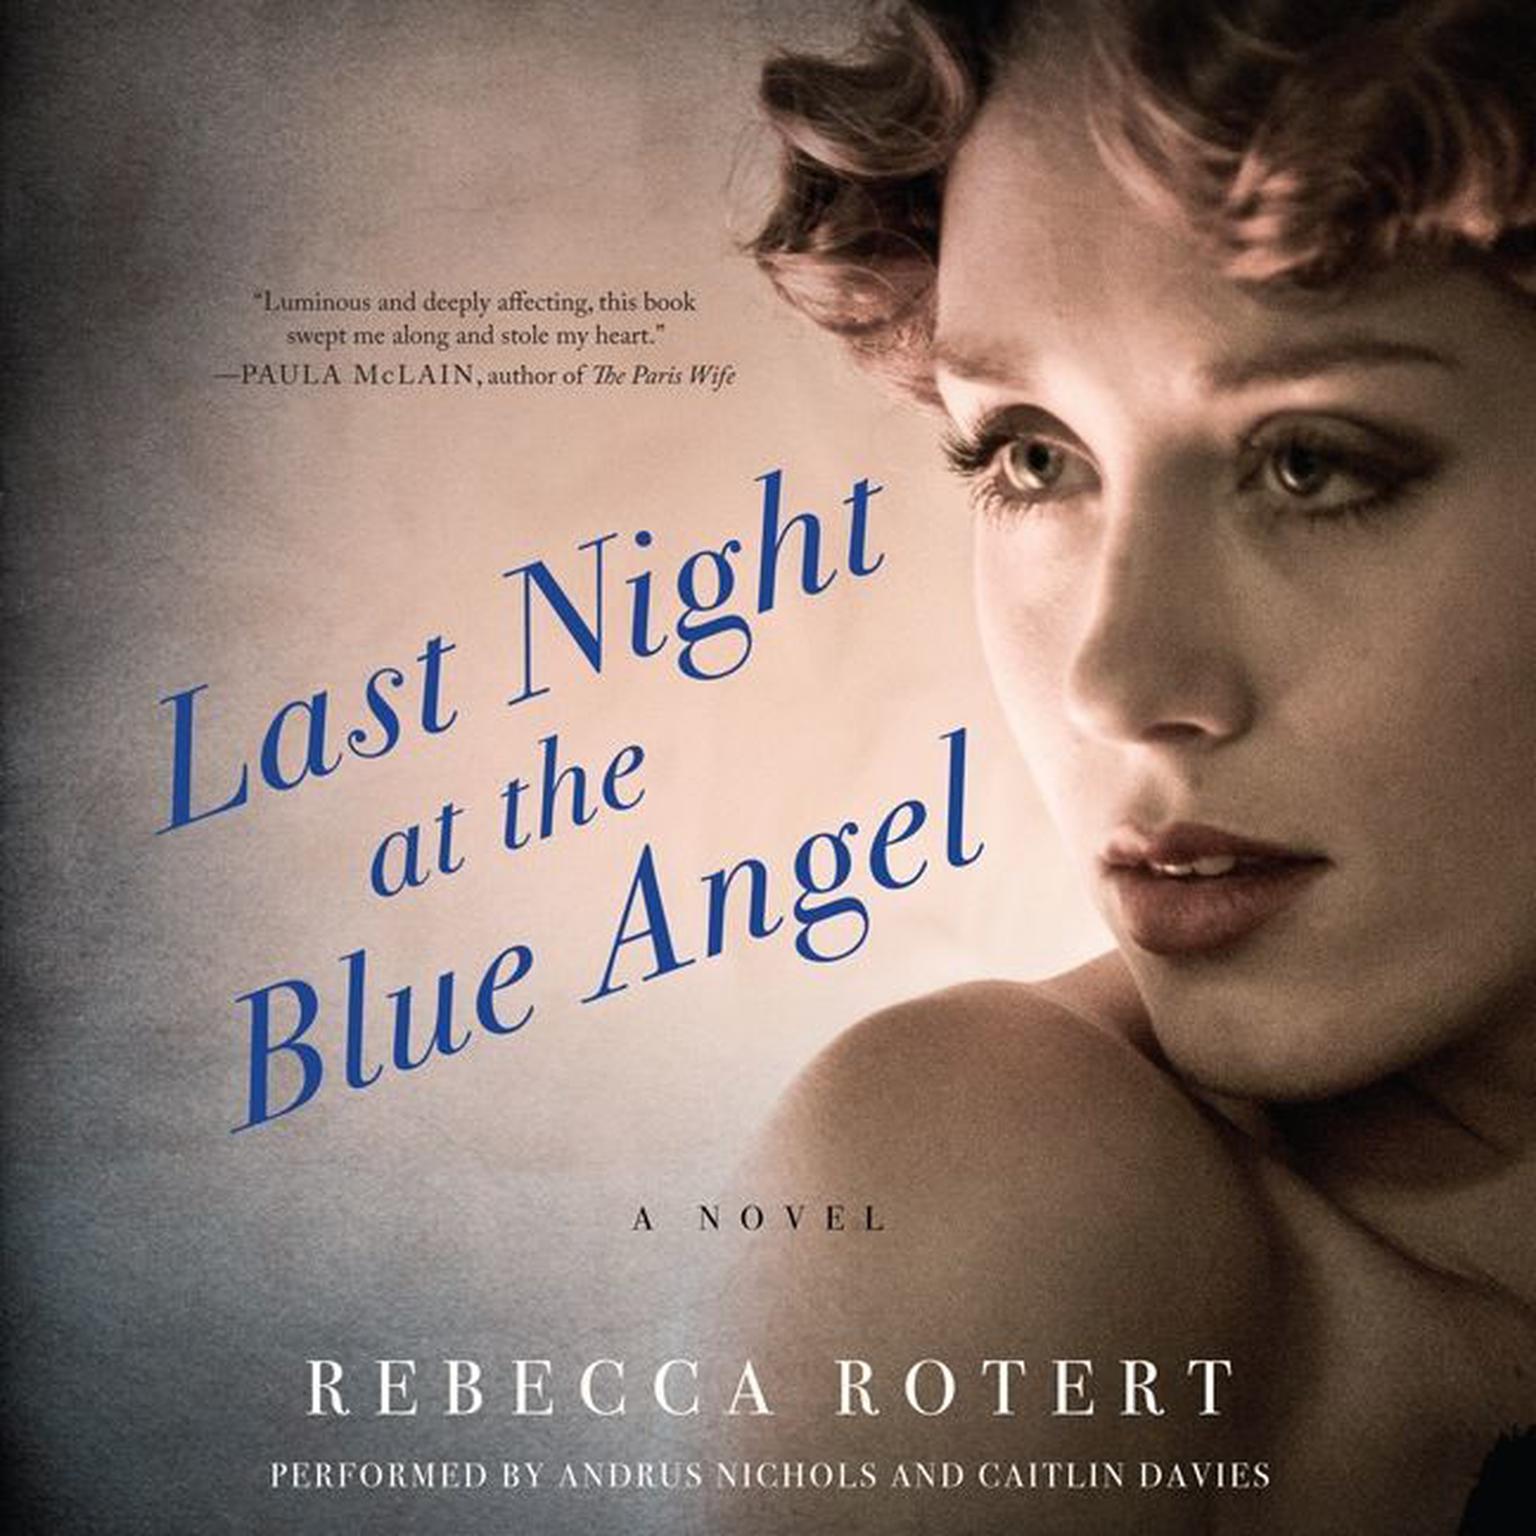 Last Night at the Blue Angel: A Novel Audiobook, by Rebecca Rotert